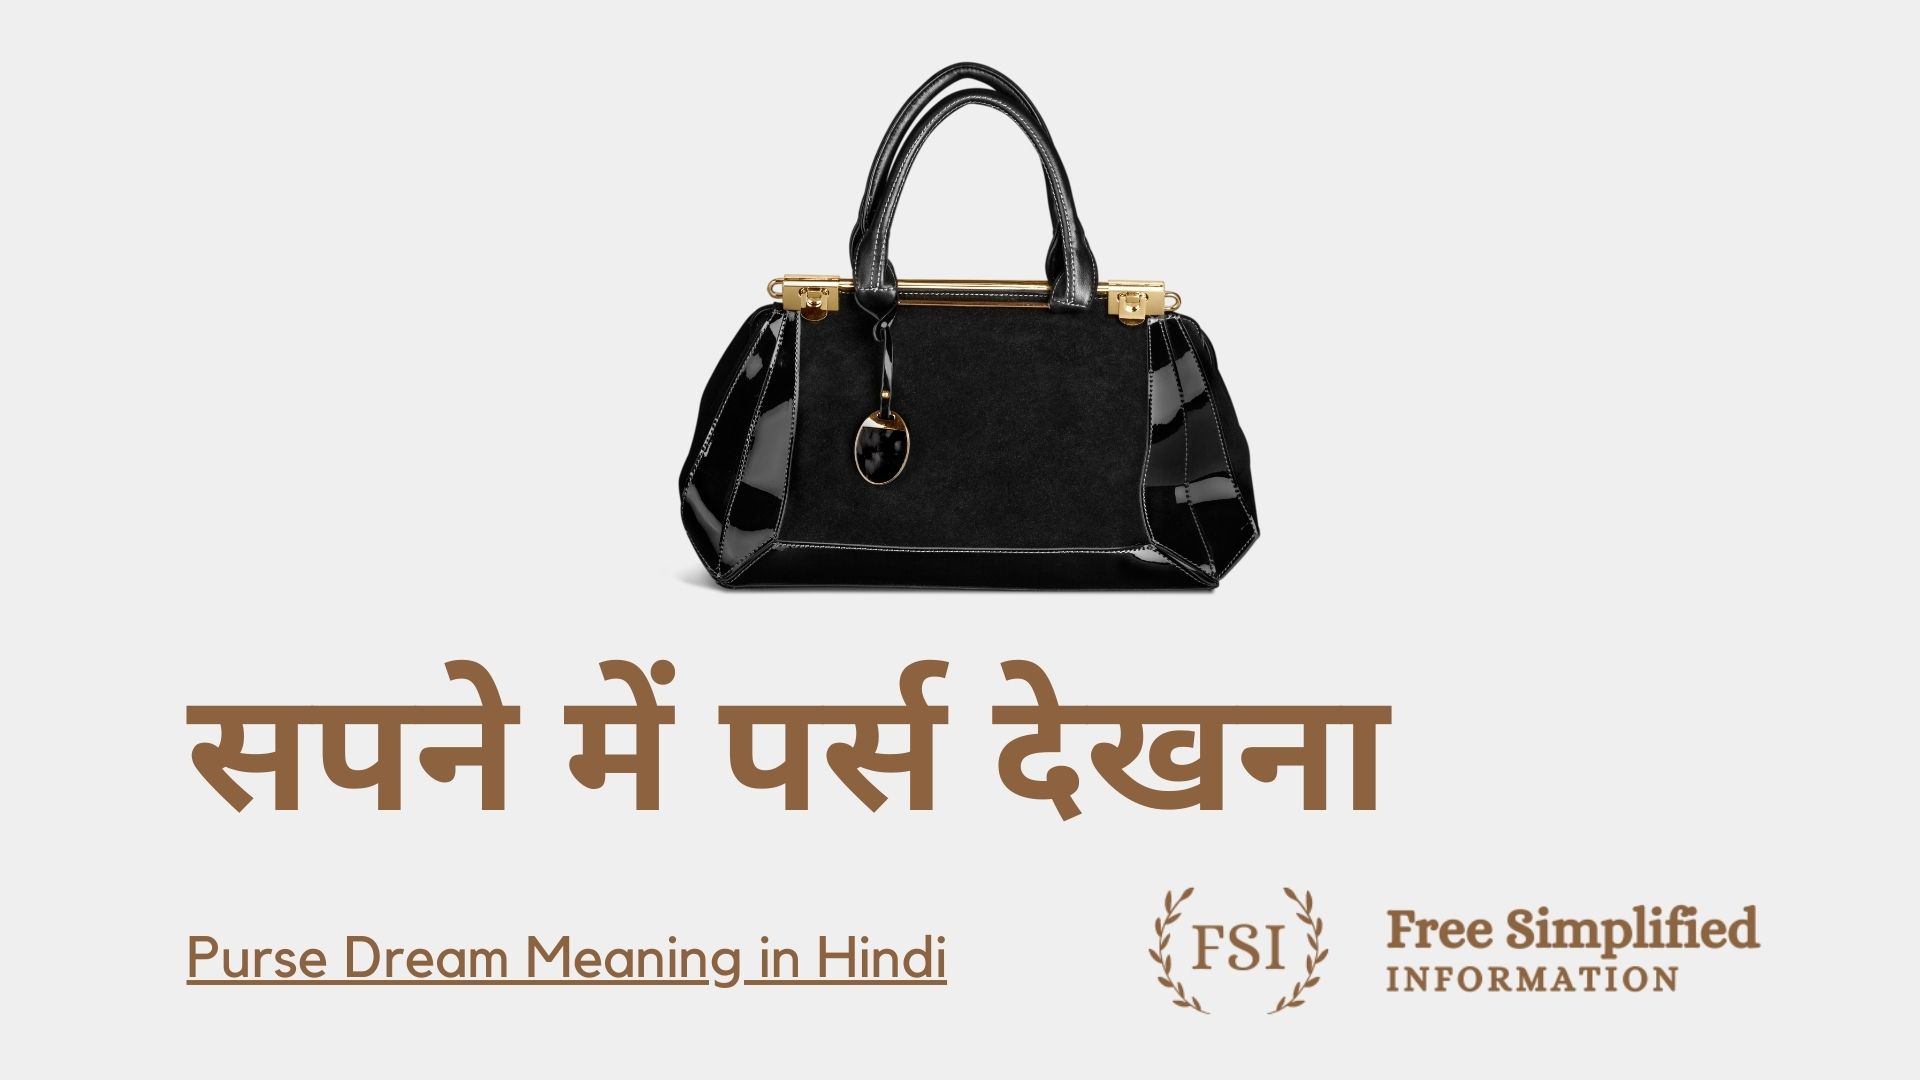 Ladies purse manufacturers in Delhi | Ladies Purse and Bags Wholesale  Market,Wallets - YouTube